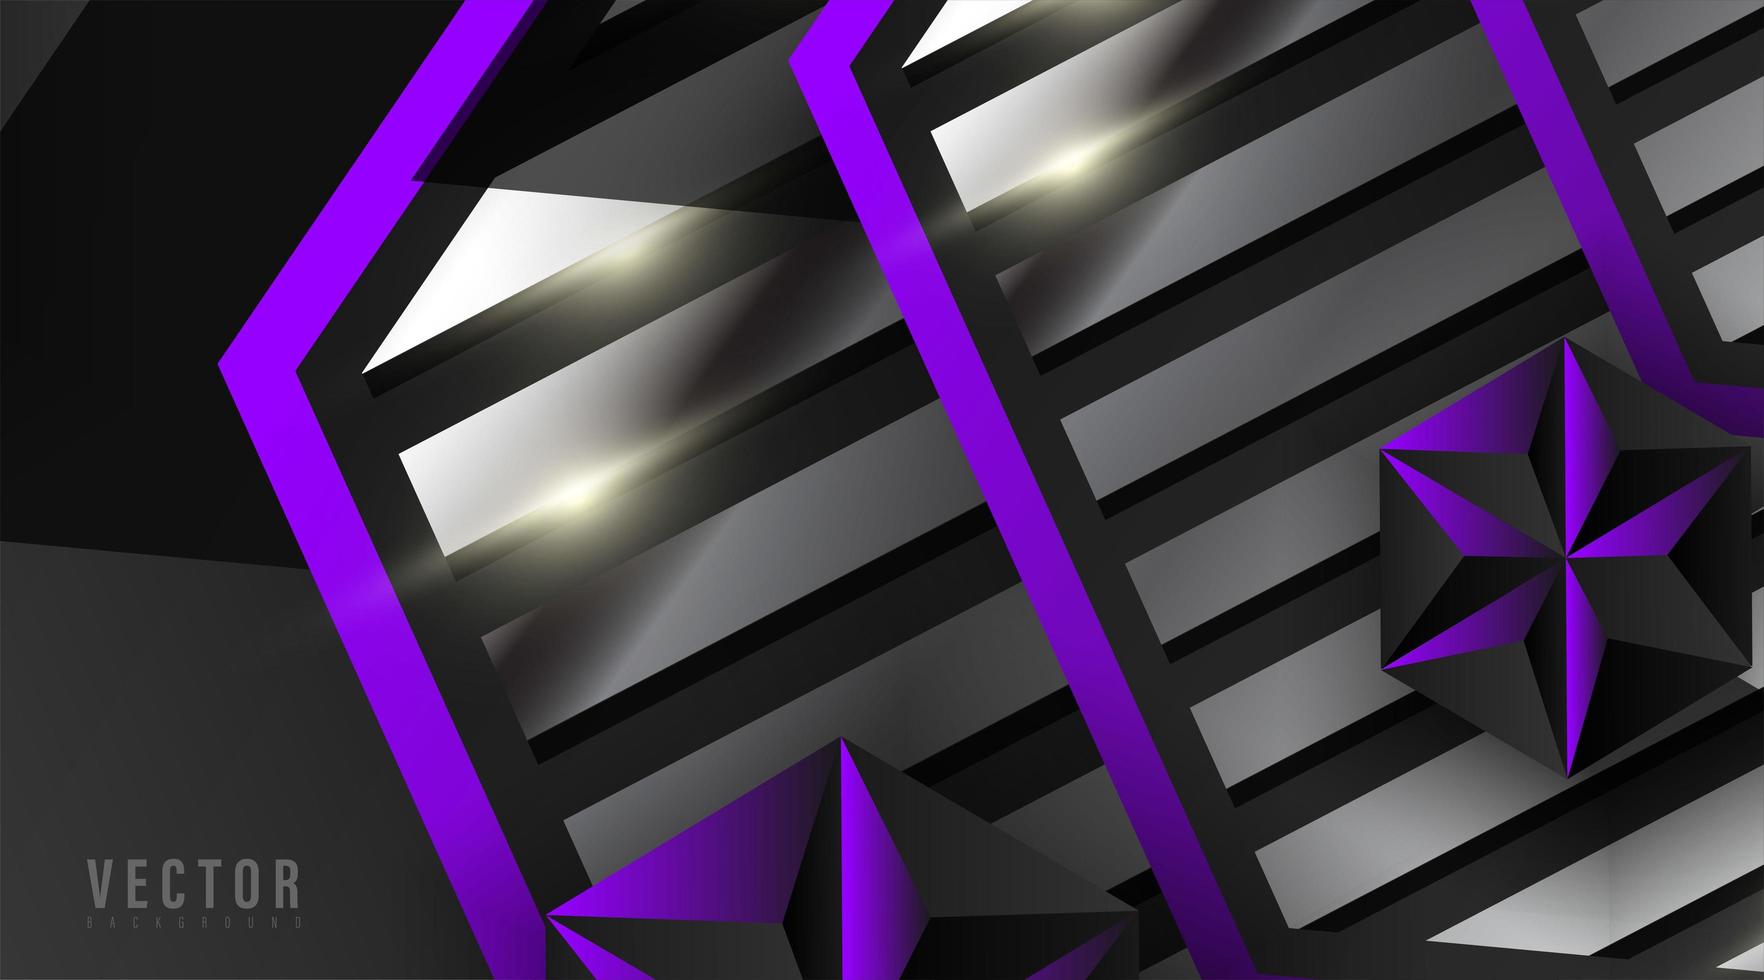 Abstract geometric silver and purple shapes background vector